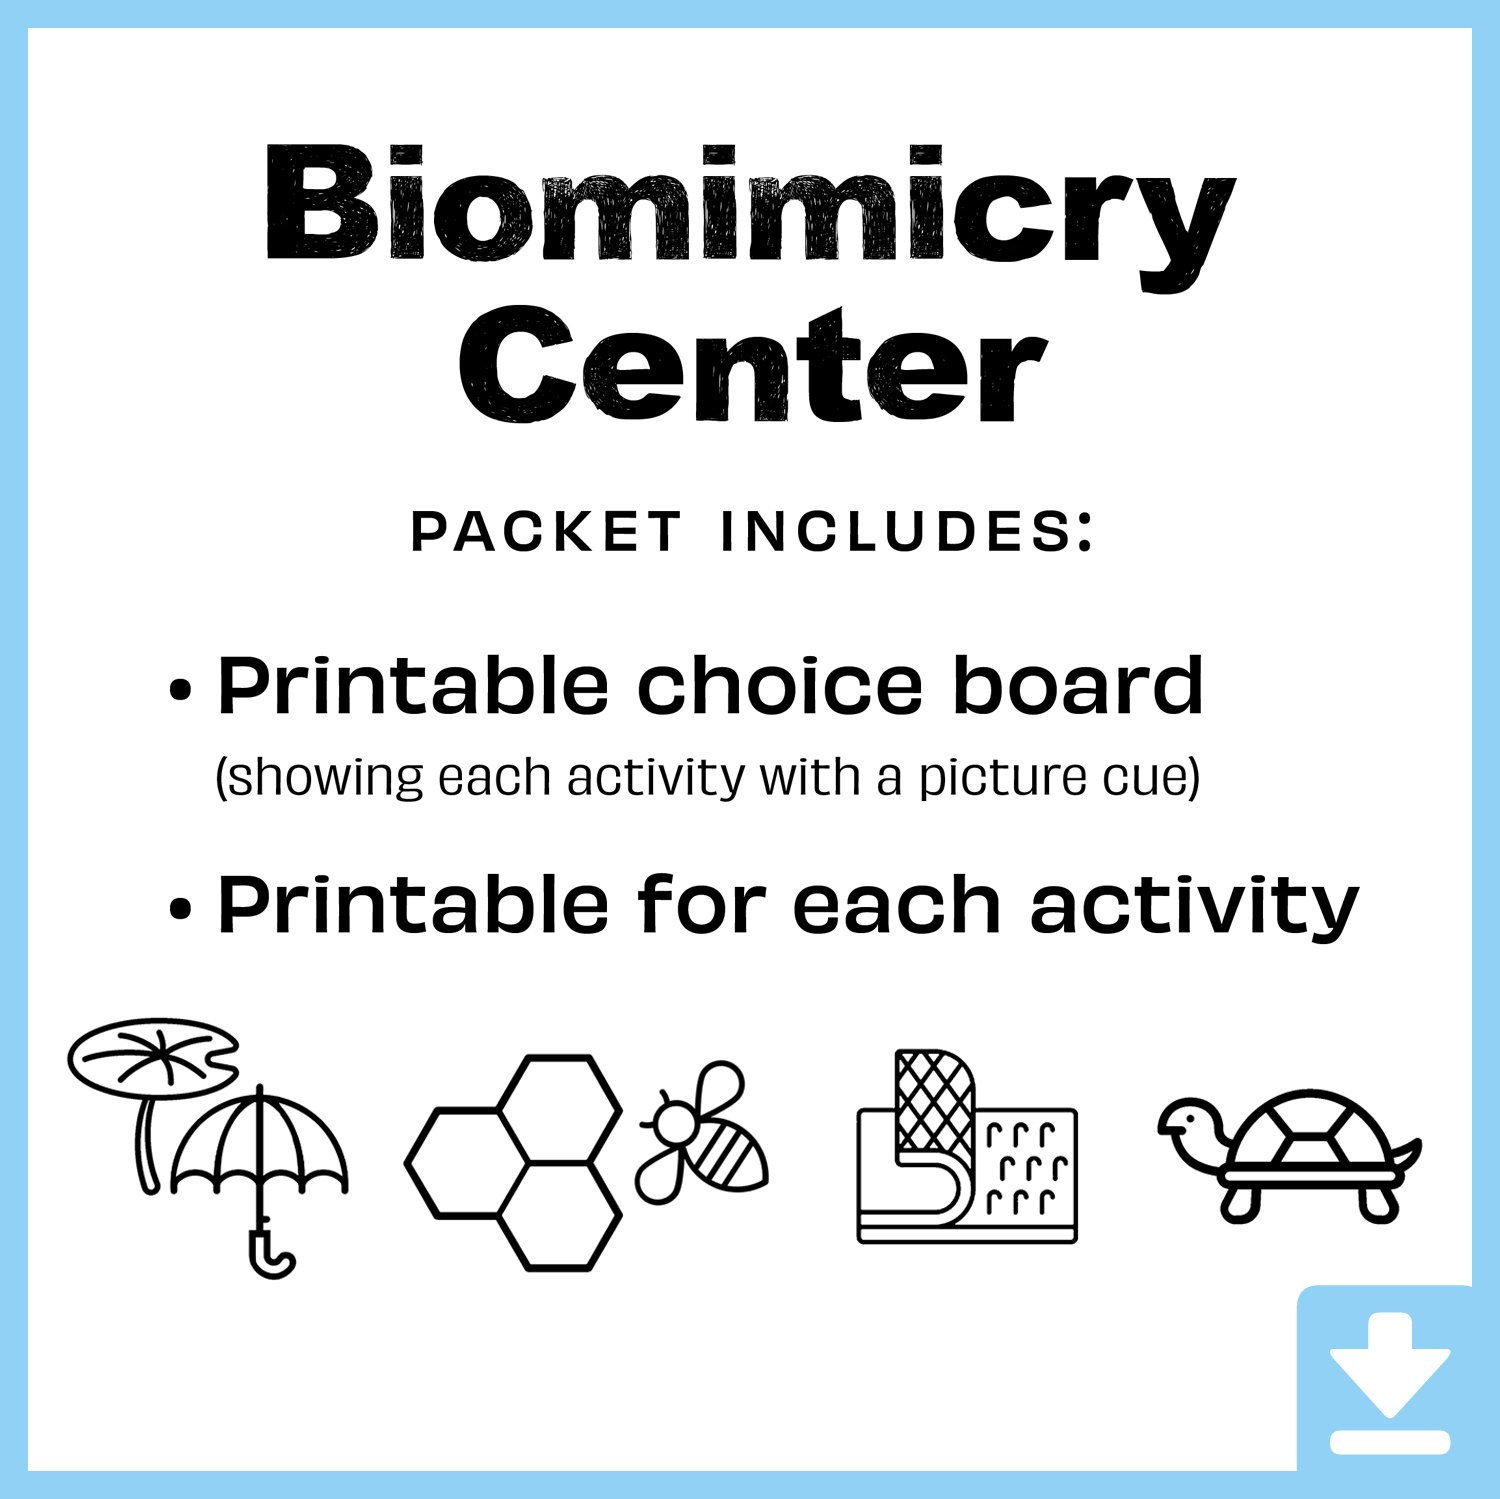 Biomimicry Center Packet